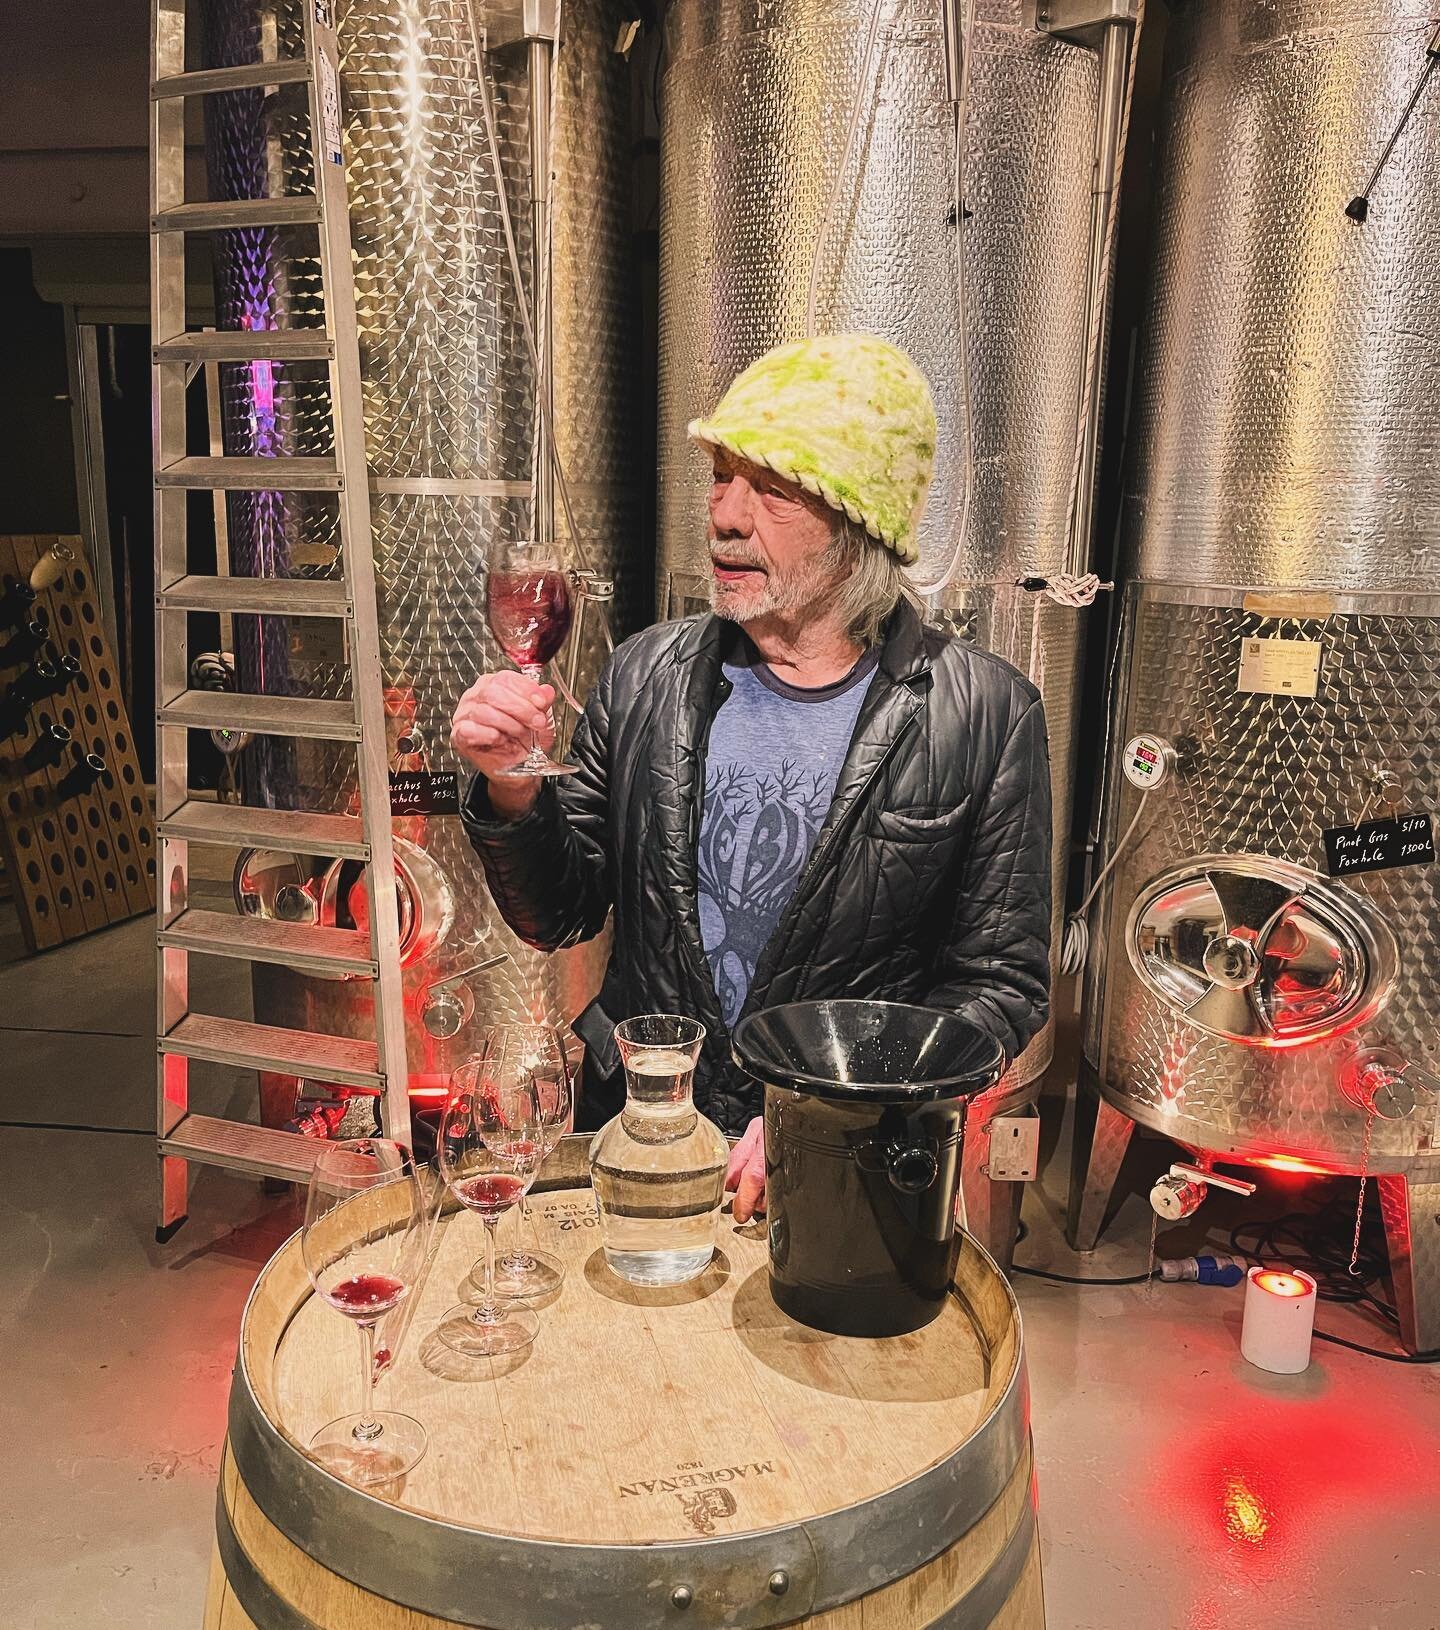 Swirls of wisdom 🍷

Tank samples of our single plot premium Pinot Noir with the boss.